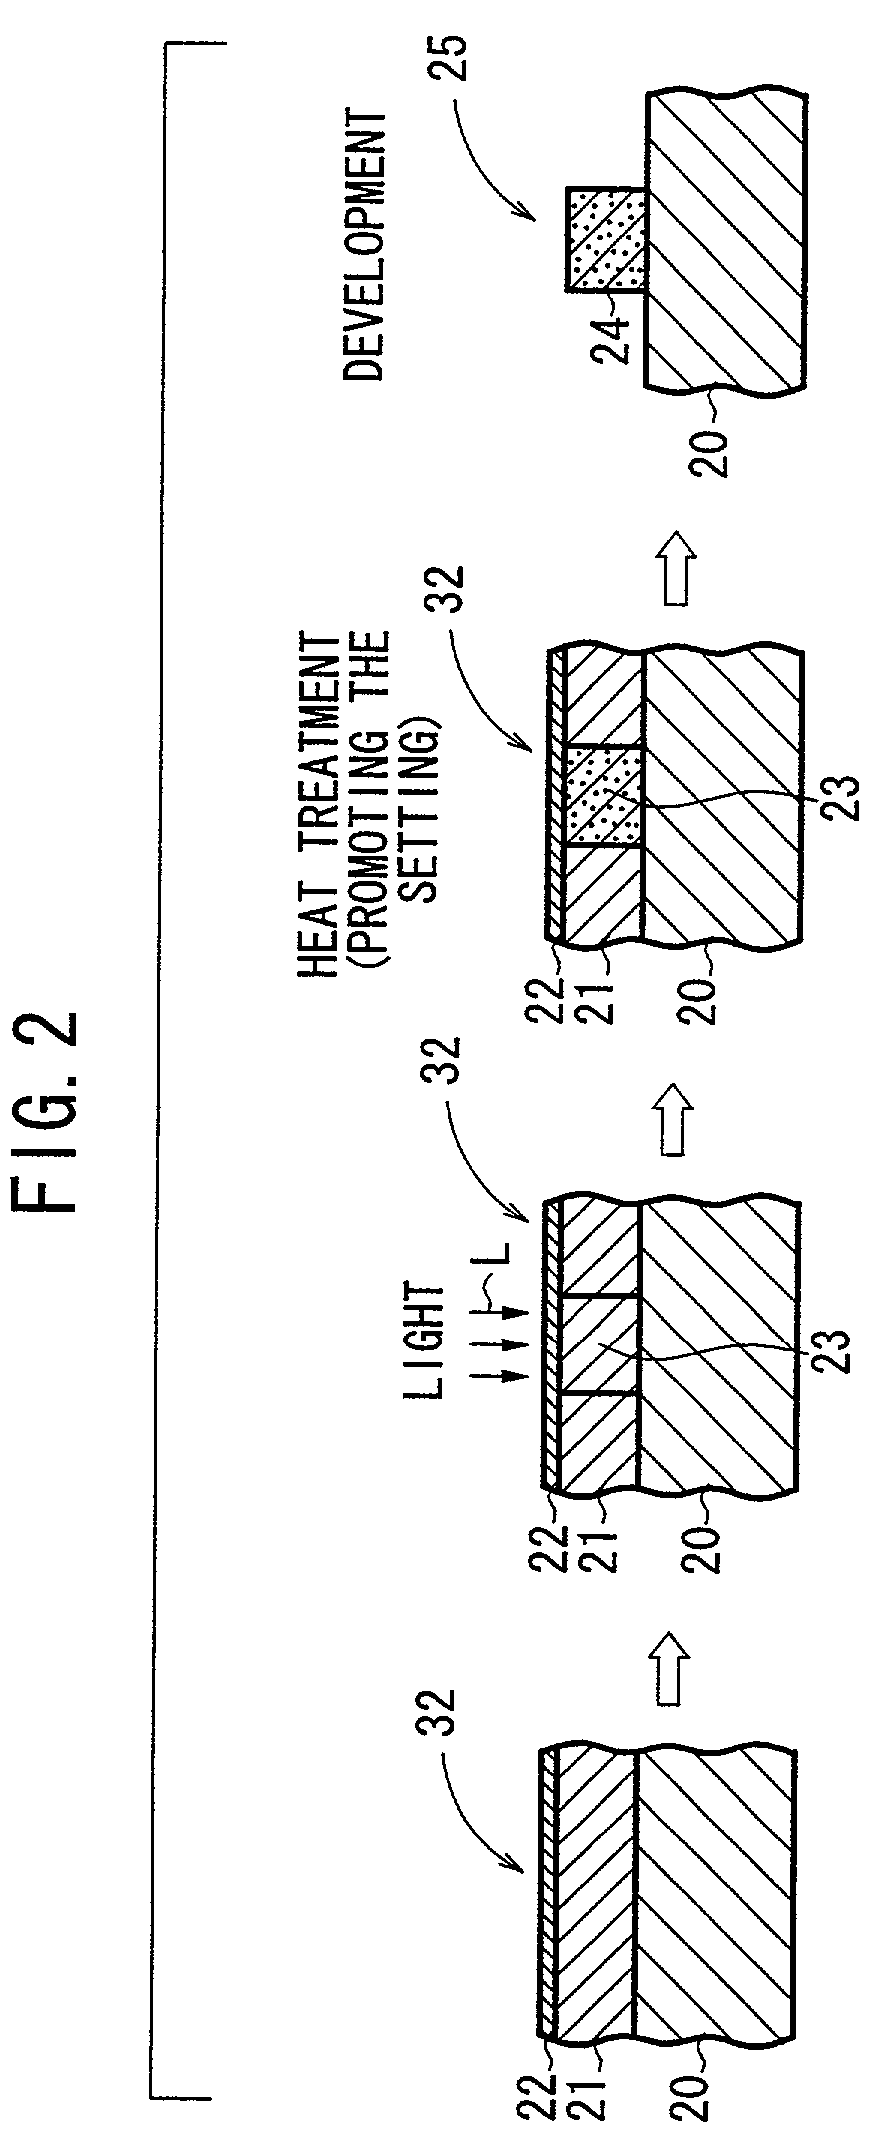 Apparatus for and method of recording optically scanned image